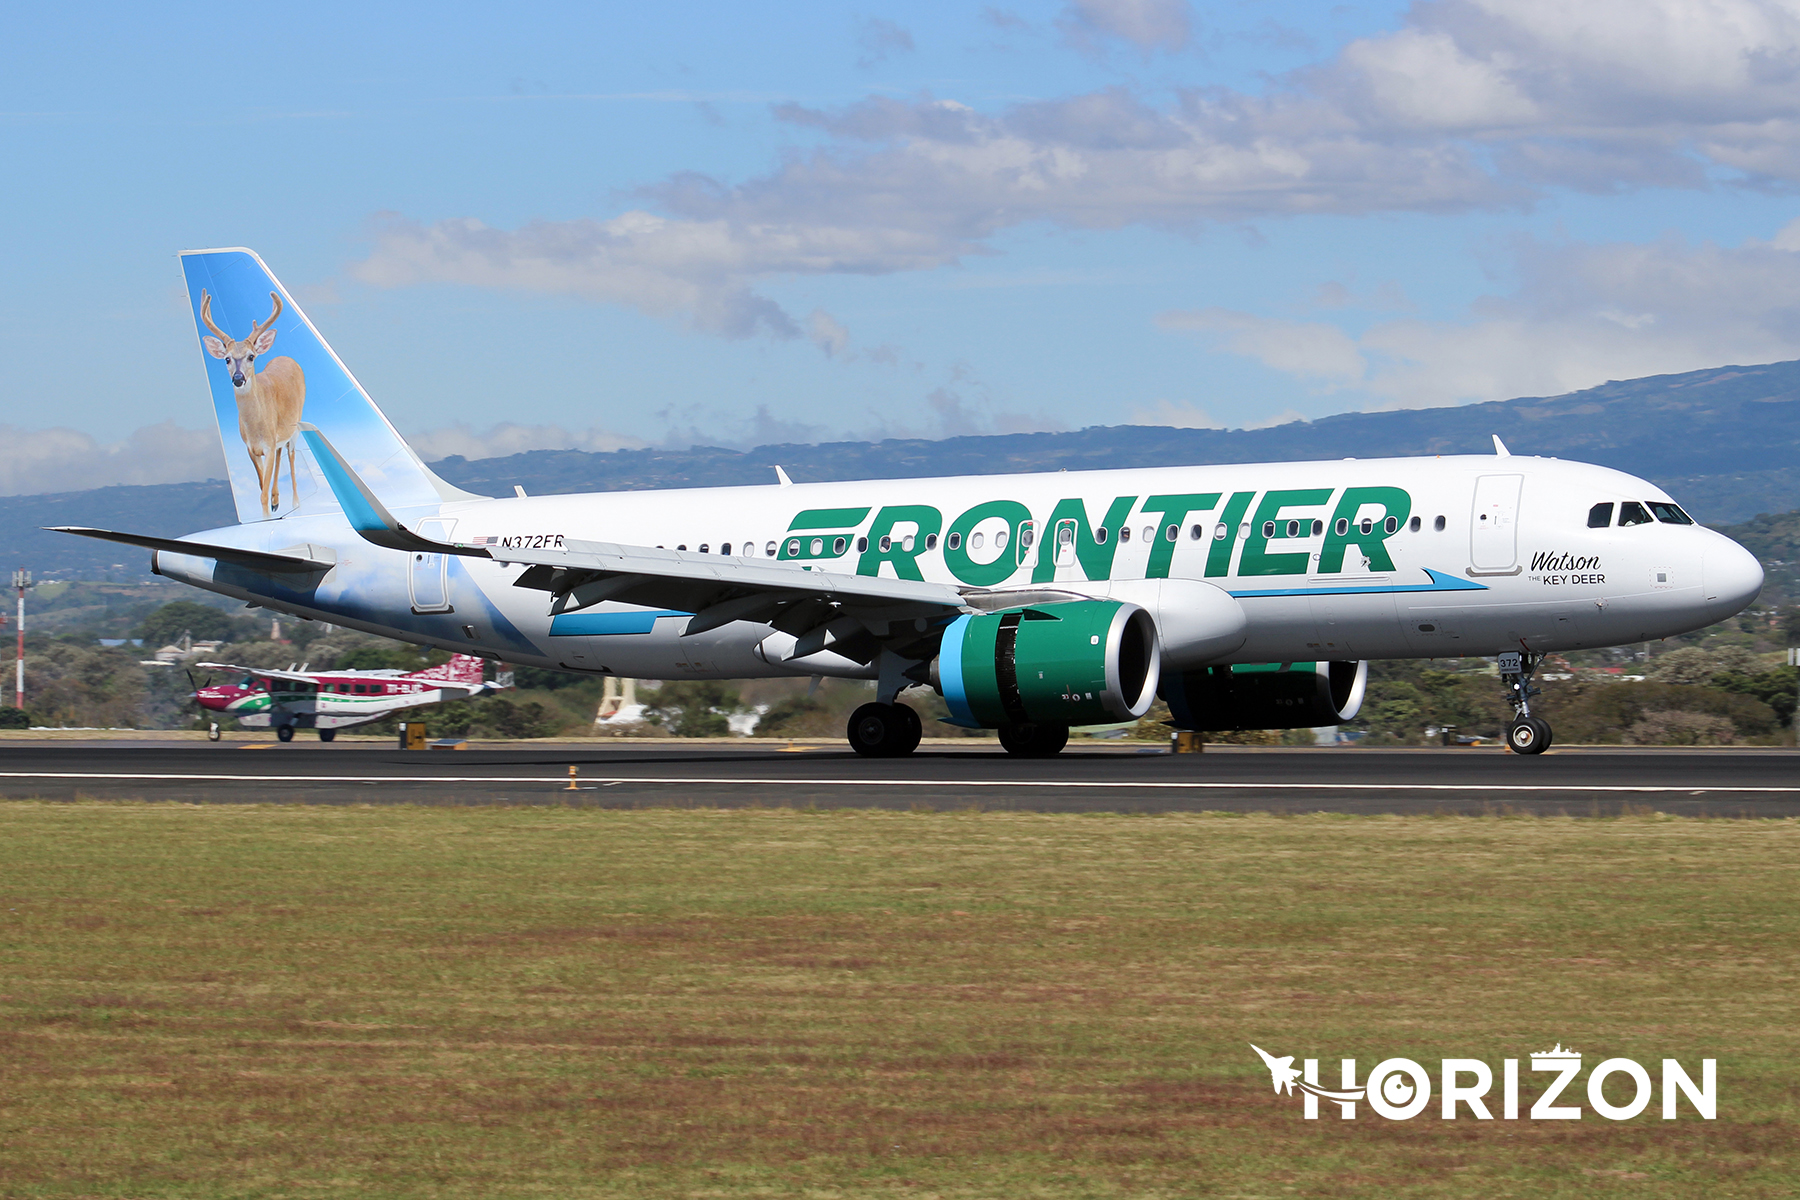 Frontier Airlines Airbus A320-251N N372FR. Photo: Stephen Borg